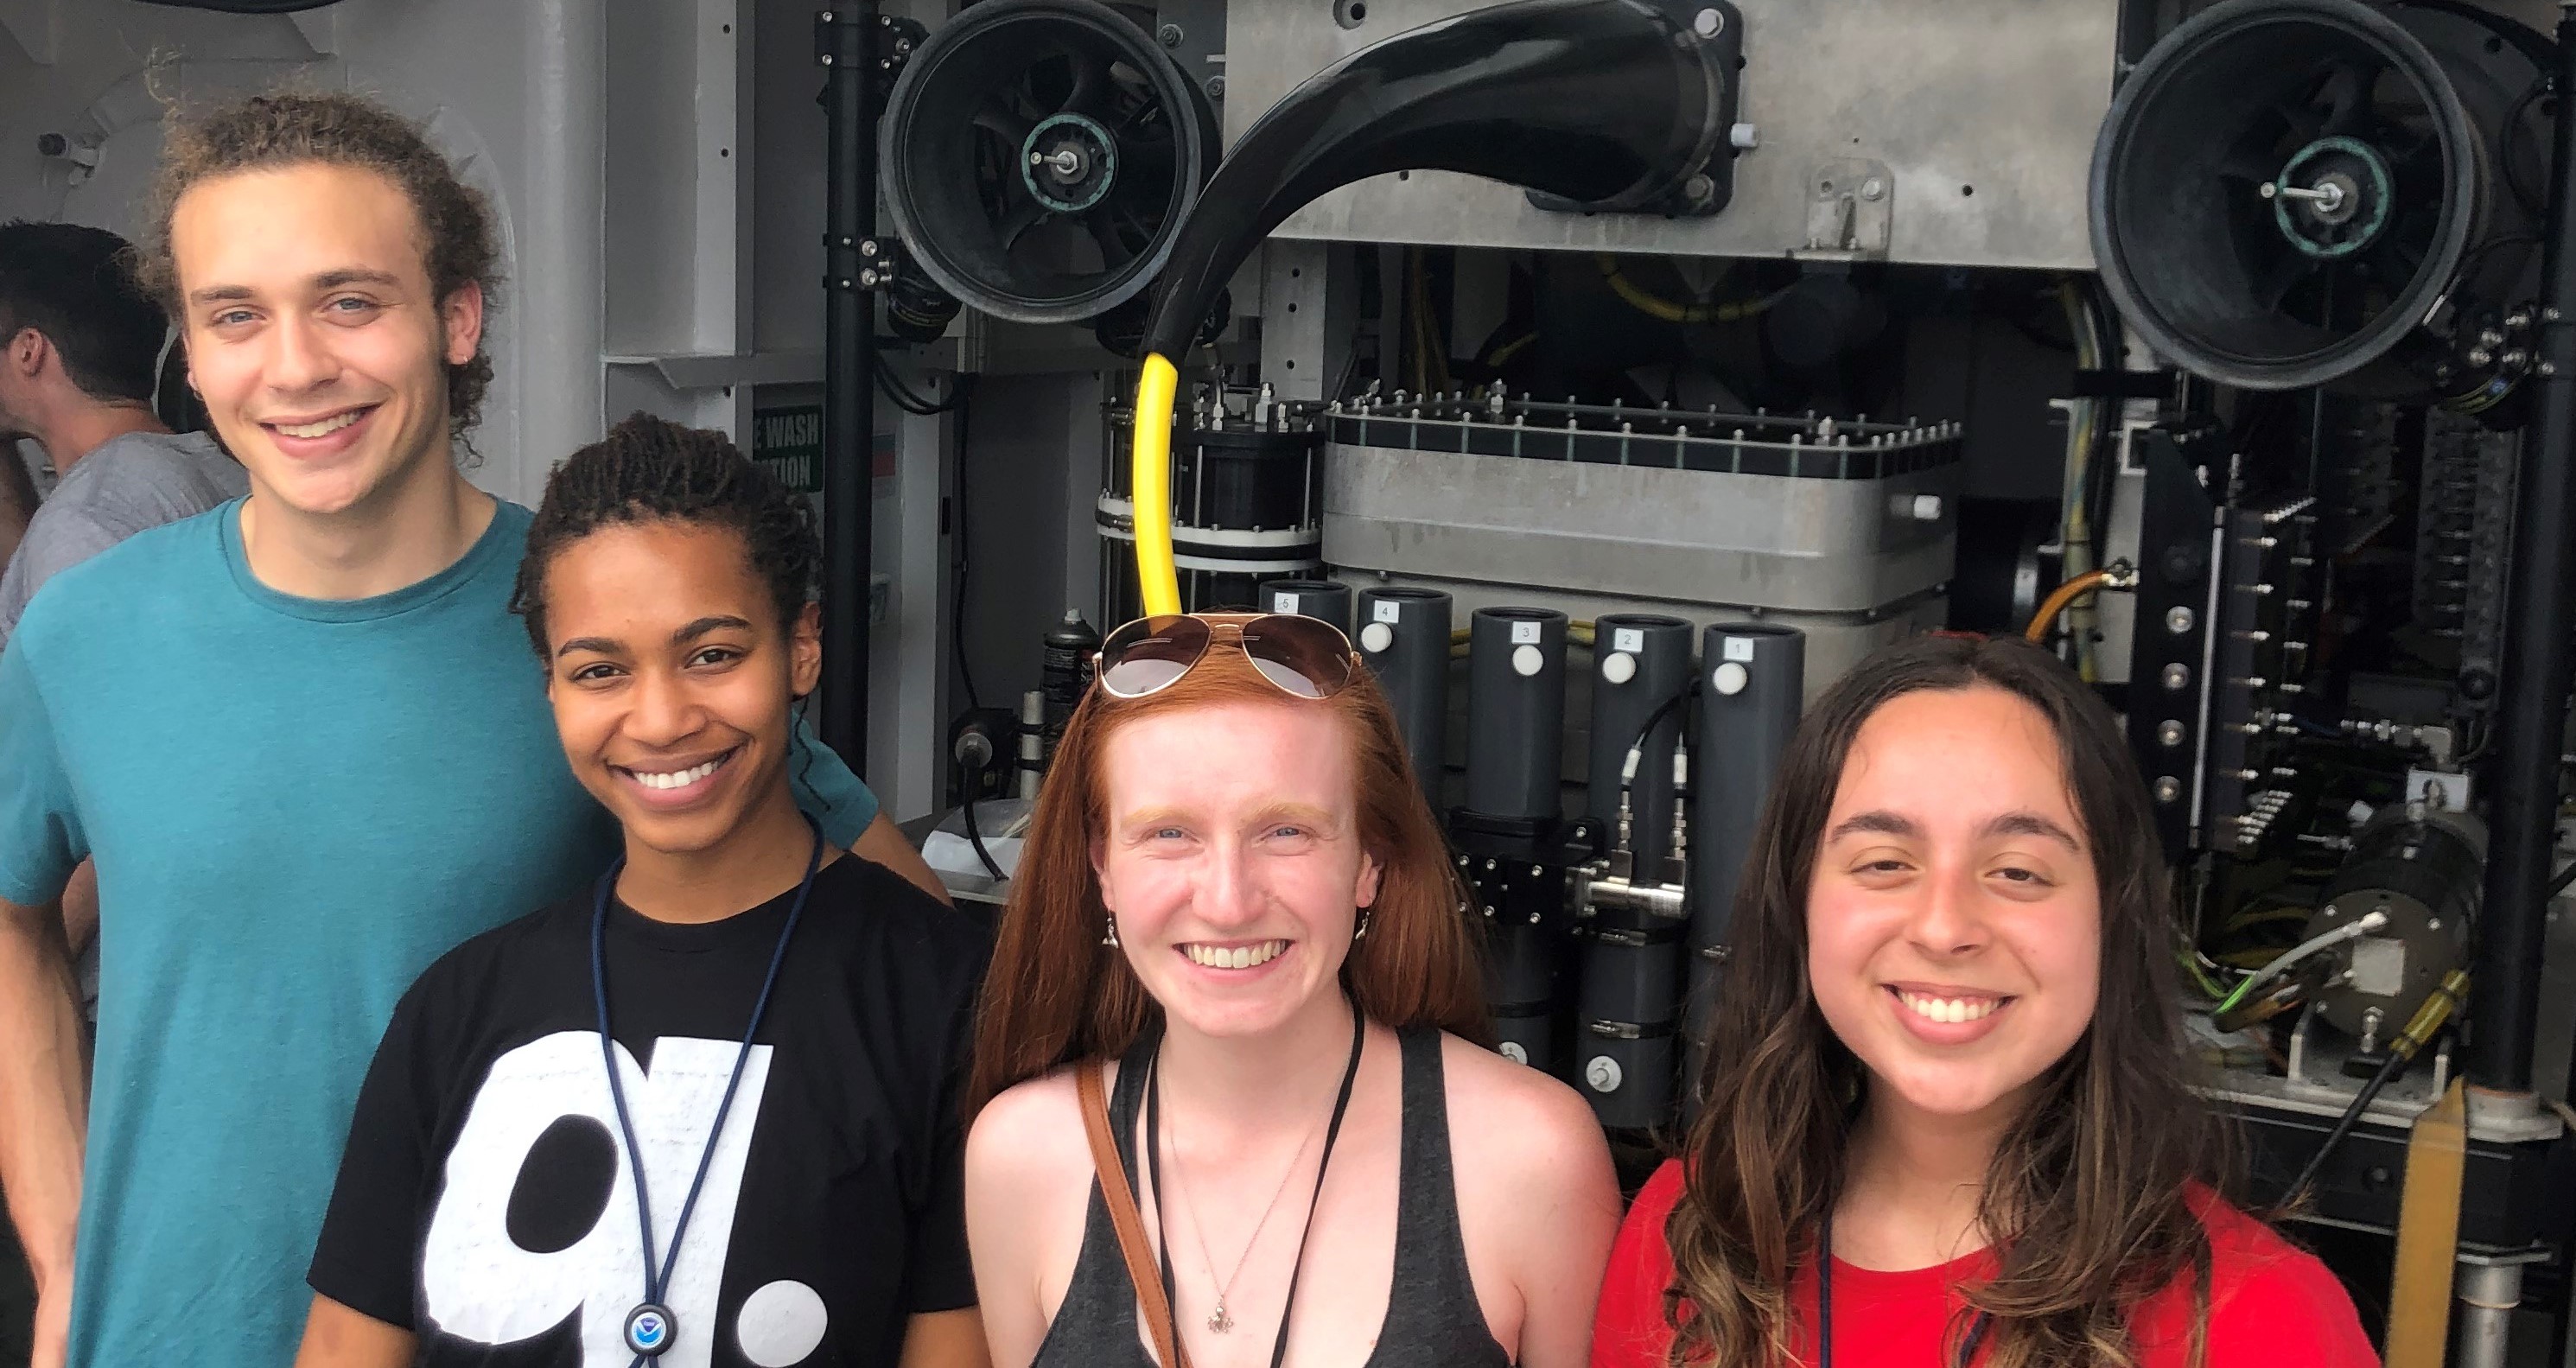 From the left, Herbert Leavitt (2018 Hollings scholar), Kristyn Wilkerson (2019 EPP/MSI scholar), Laura Anthony (2018 Hollings scholar), and Paola Santiago (2019 EPP/MSI scholar) aboard NOAA Ship Okeanos Explorer standing in front of the ROV Deep Discoverer after its return to port from the Windows to the Deep 2019 Exploration of the Mid and South Atlantic.